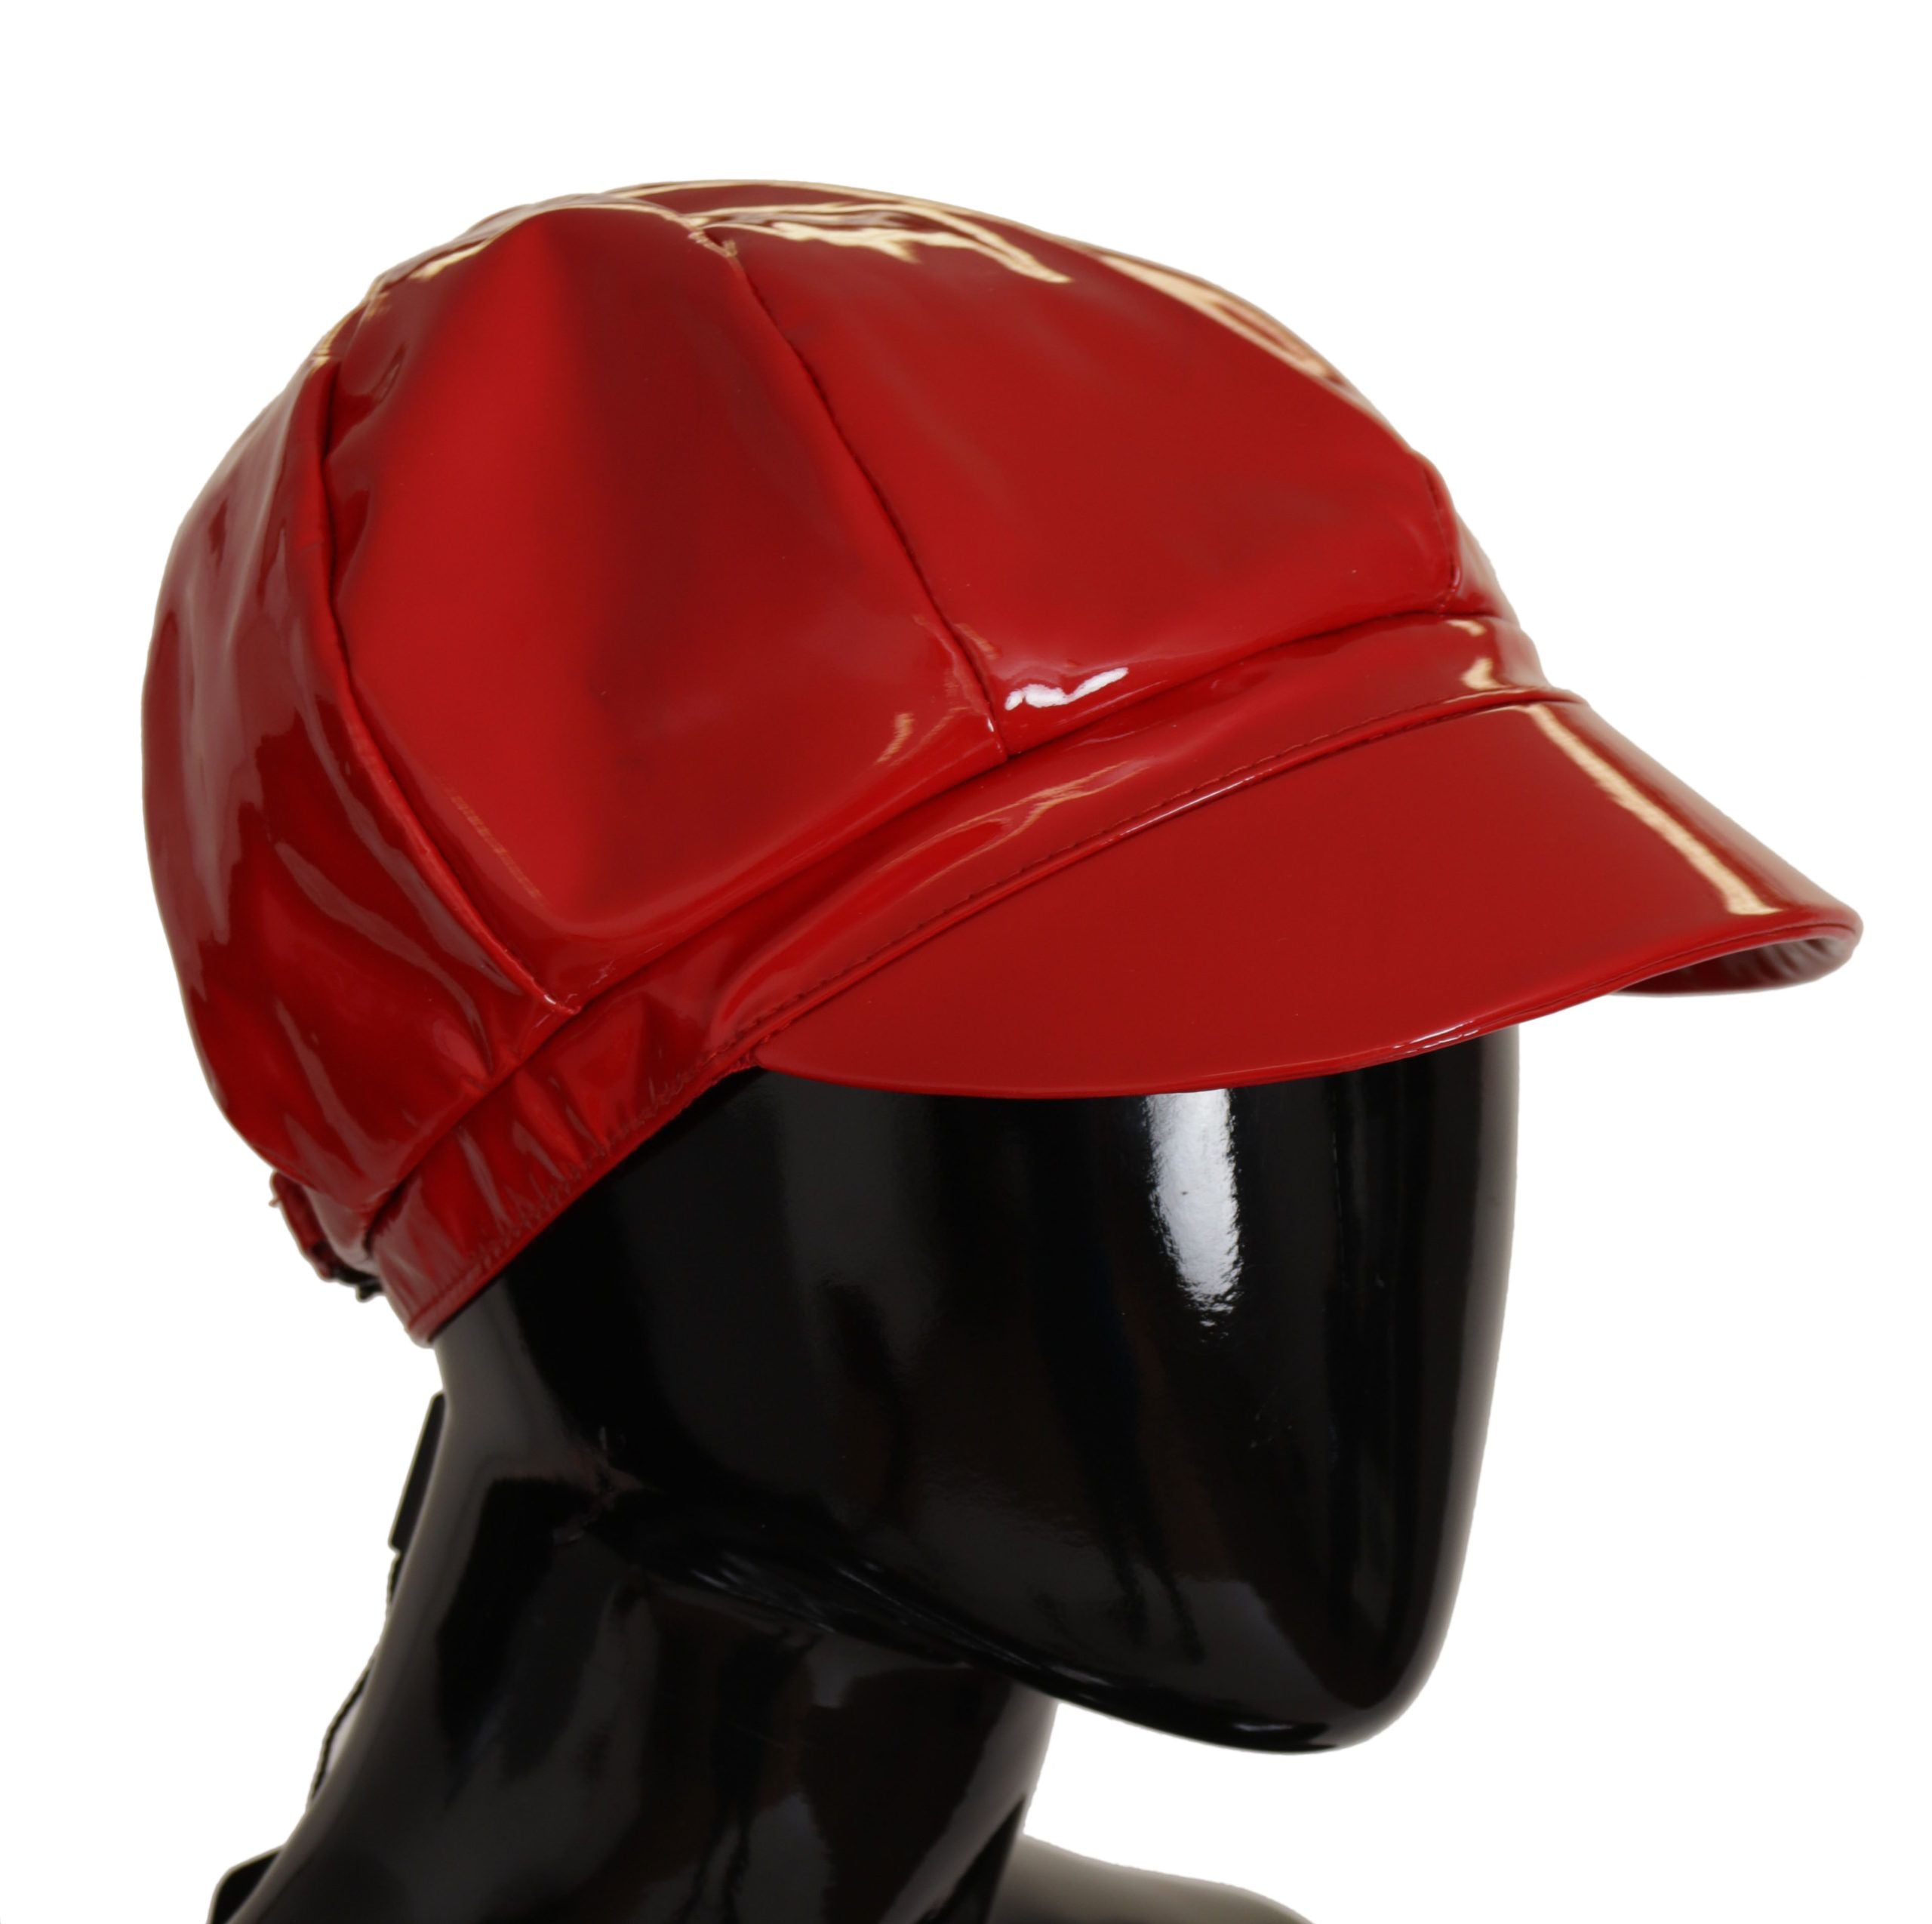 Dolce & Gabbana Chic Red Bucket Cap for the Fashion-Forward